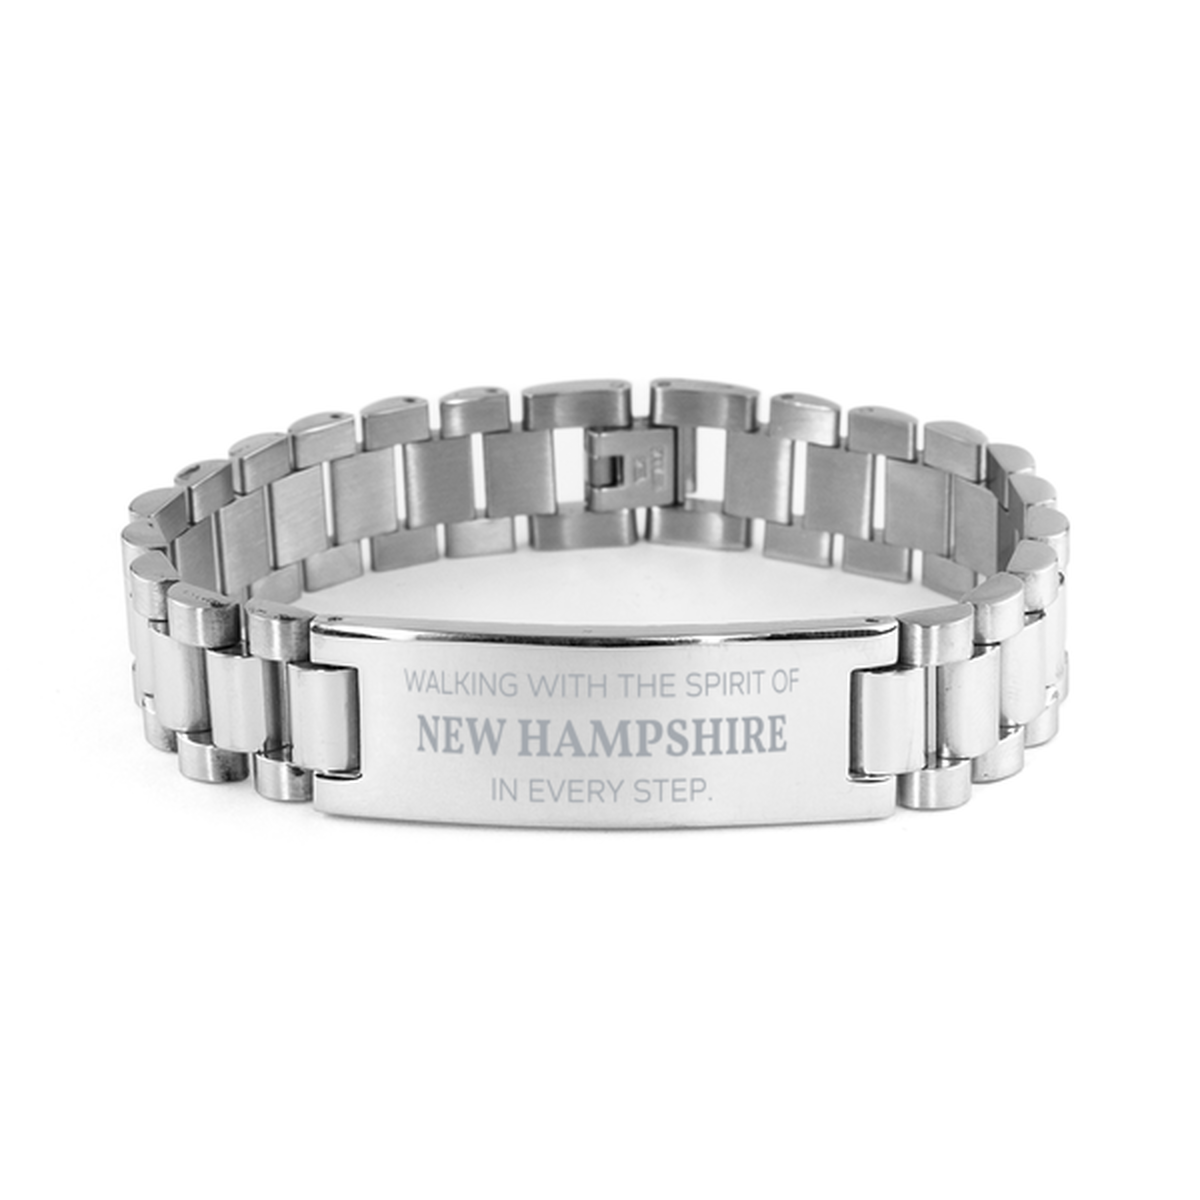 New Hampshire Gifts, Walking with the spirit, Love New Hampshire Birthday Christmas Ladder Stainless Steel Bracelet For New Hampshire People, Men, Women, Friends